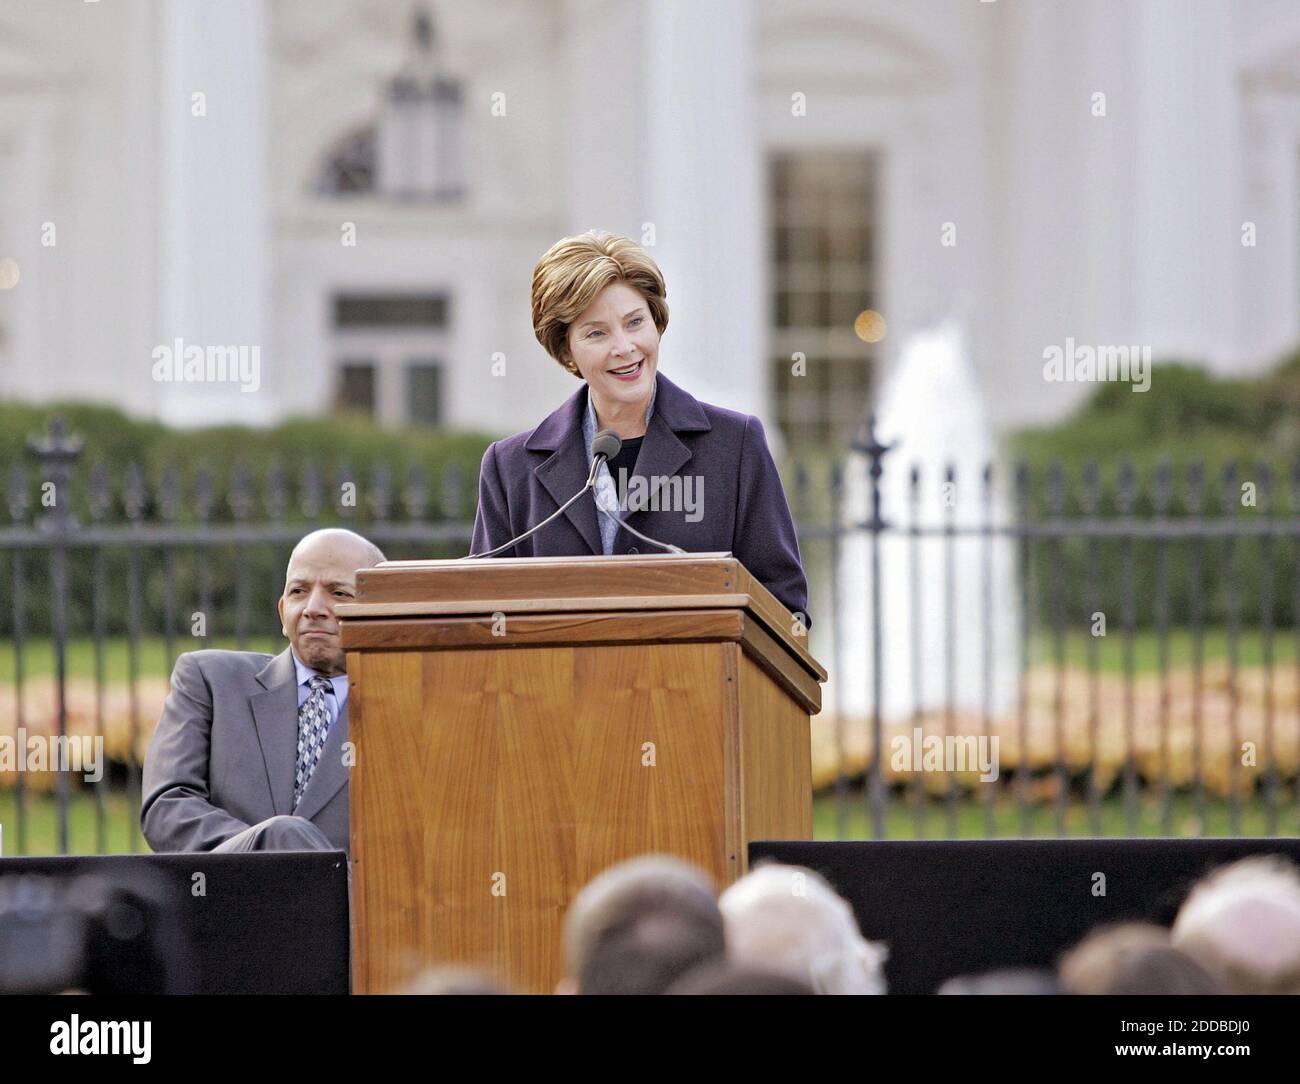 NO FILM, NO VIDEO, NO TV, NO DOCUMENTARY - Mrs. Laura Bush delivers remarks during a ceremony to re-open Pennsylvania Avenue to pedestrian traffic in front of the White House, on November 9, 2004, in Washington, D.C, USA. Photo by Chuck Kennedy/US News Story Slugged/KRT/ABACA. Stock Photo